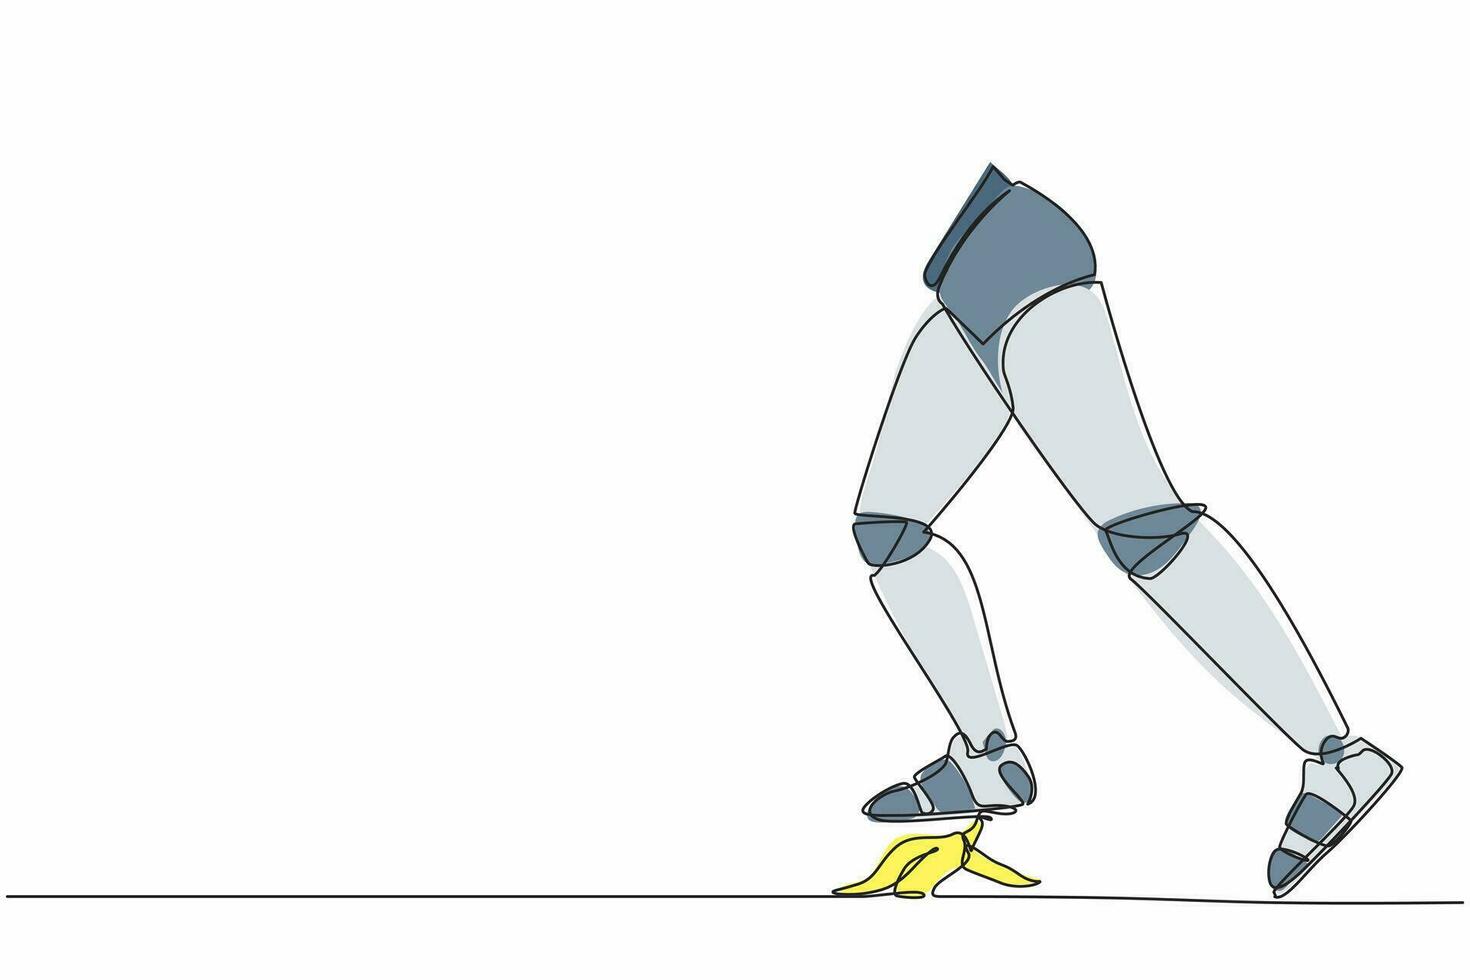 Continuous one line drawing of unlucky robot leg step on banana peel. Imminent danger, banana peel under robot foot. Humanoid robot cybernetic organism. Single line design vector graphic illustration